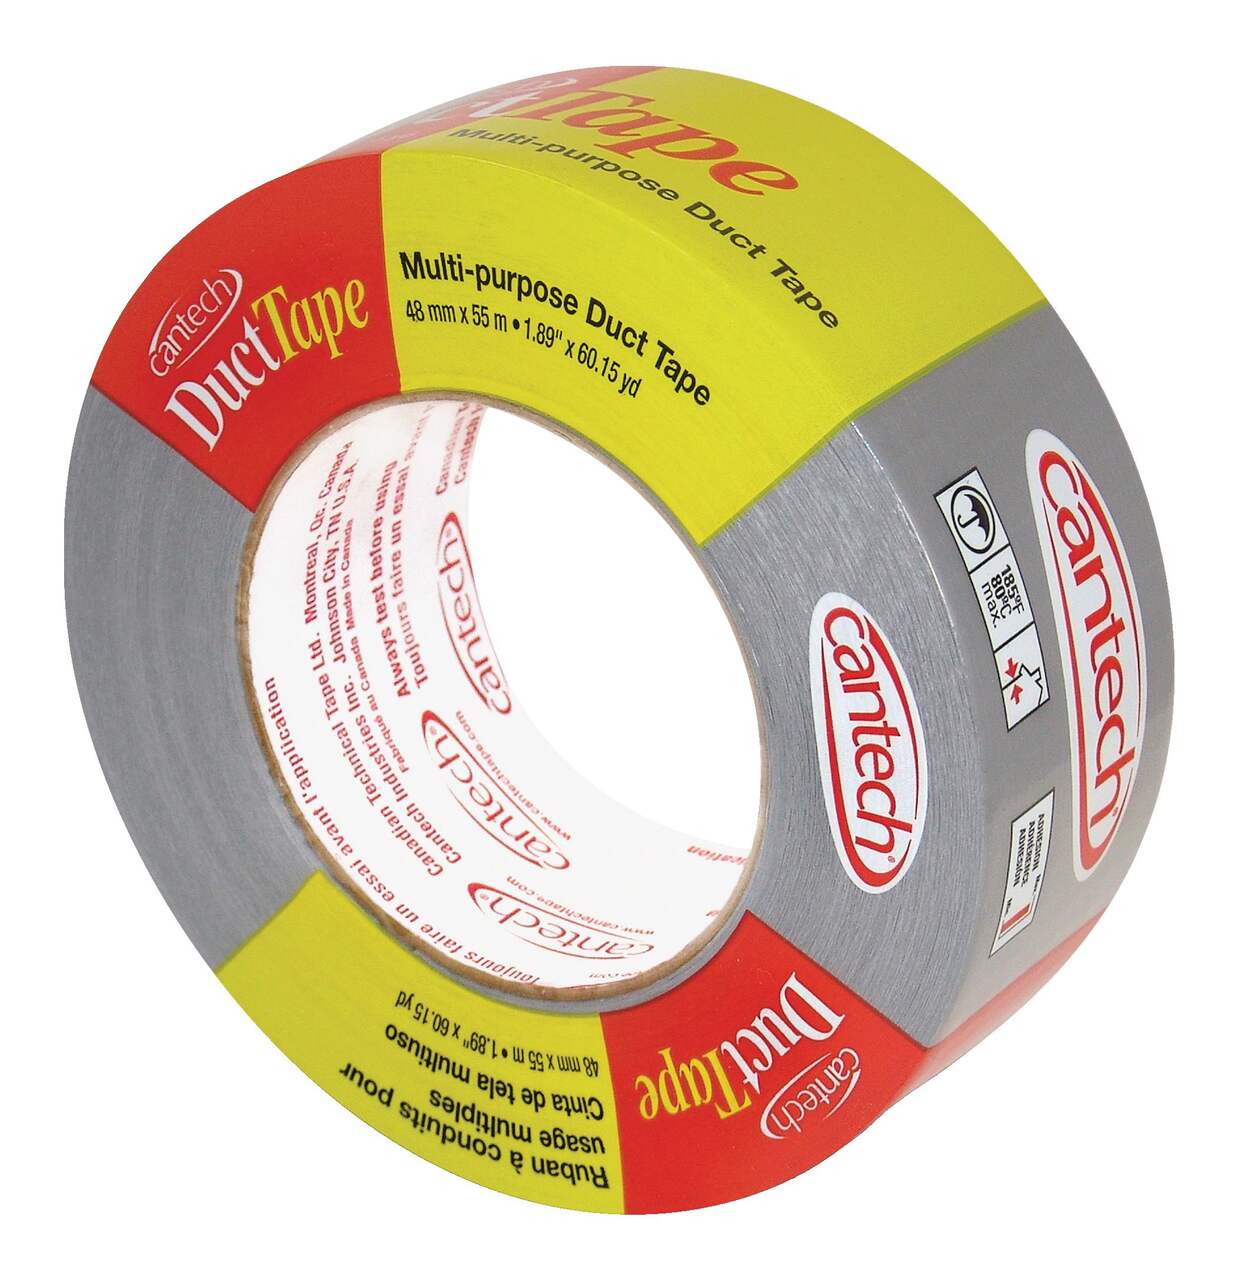 Cantech Multi-Purpose Duct Tape, Heavy Duty Utility Tape, Silver